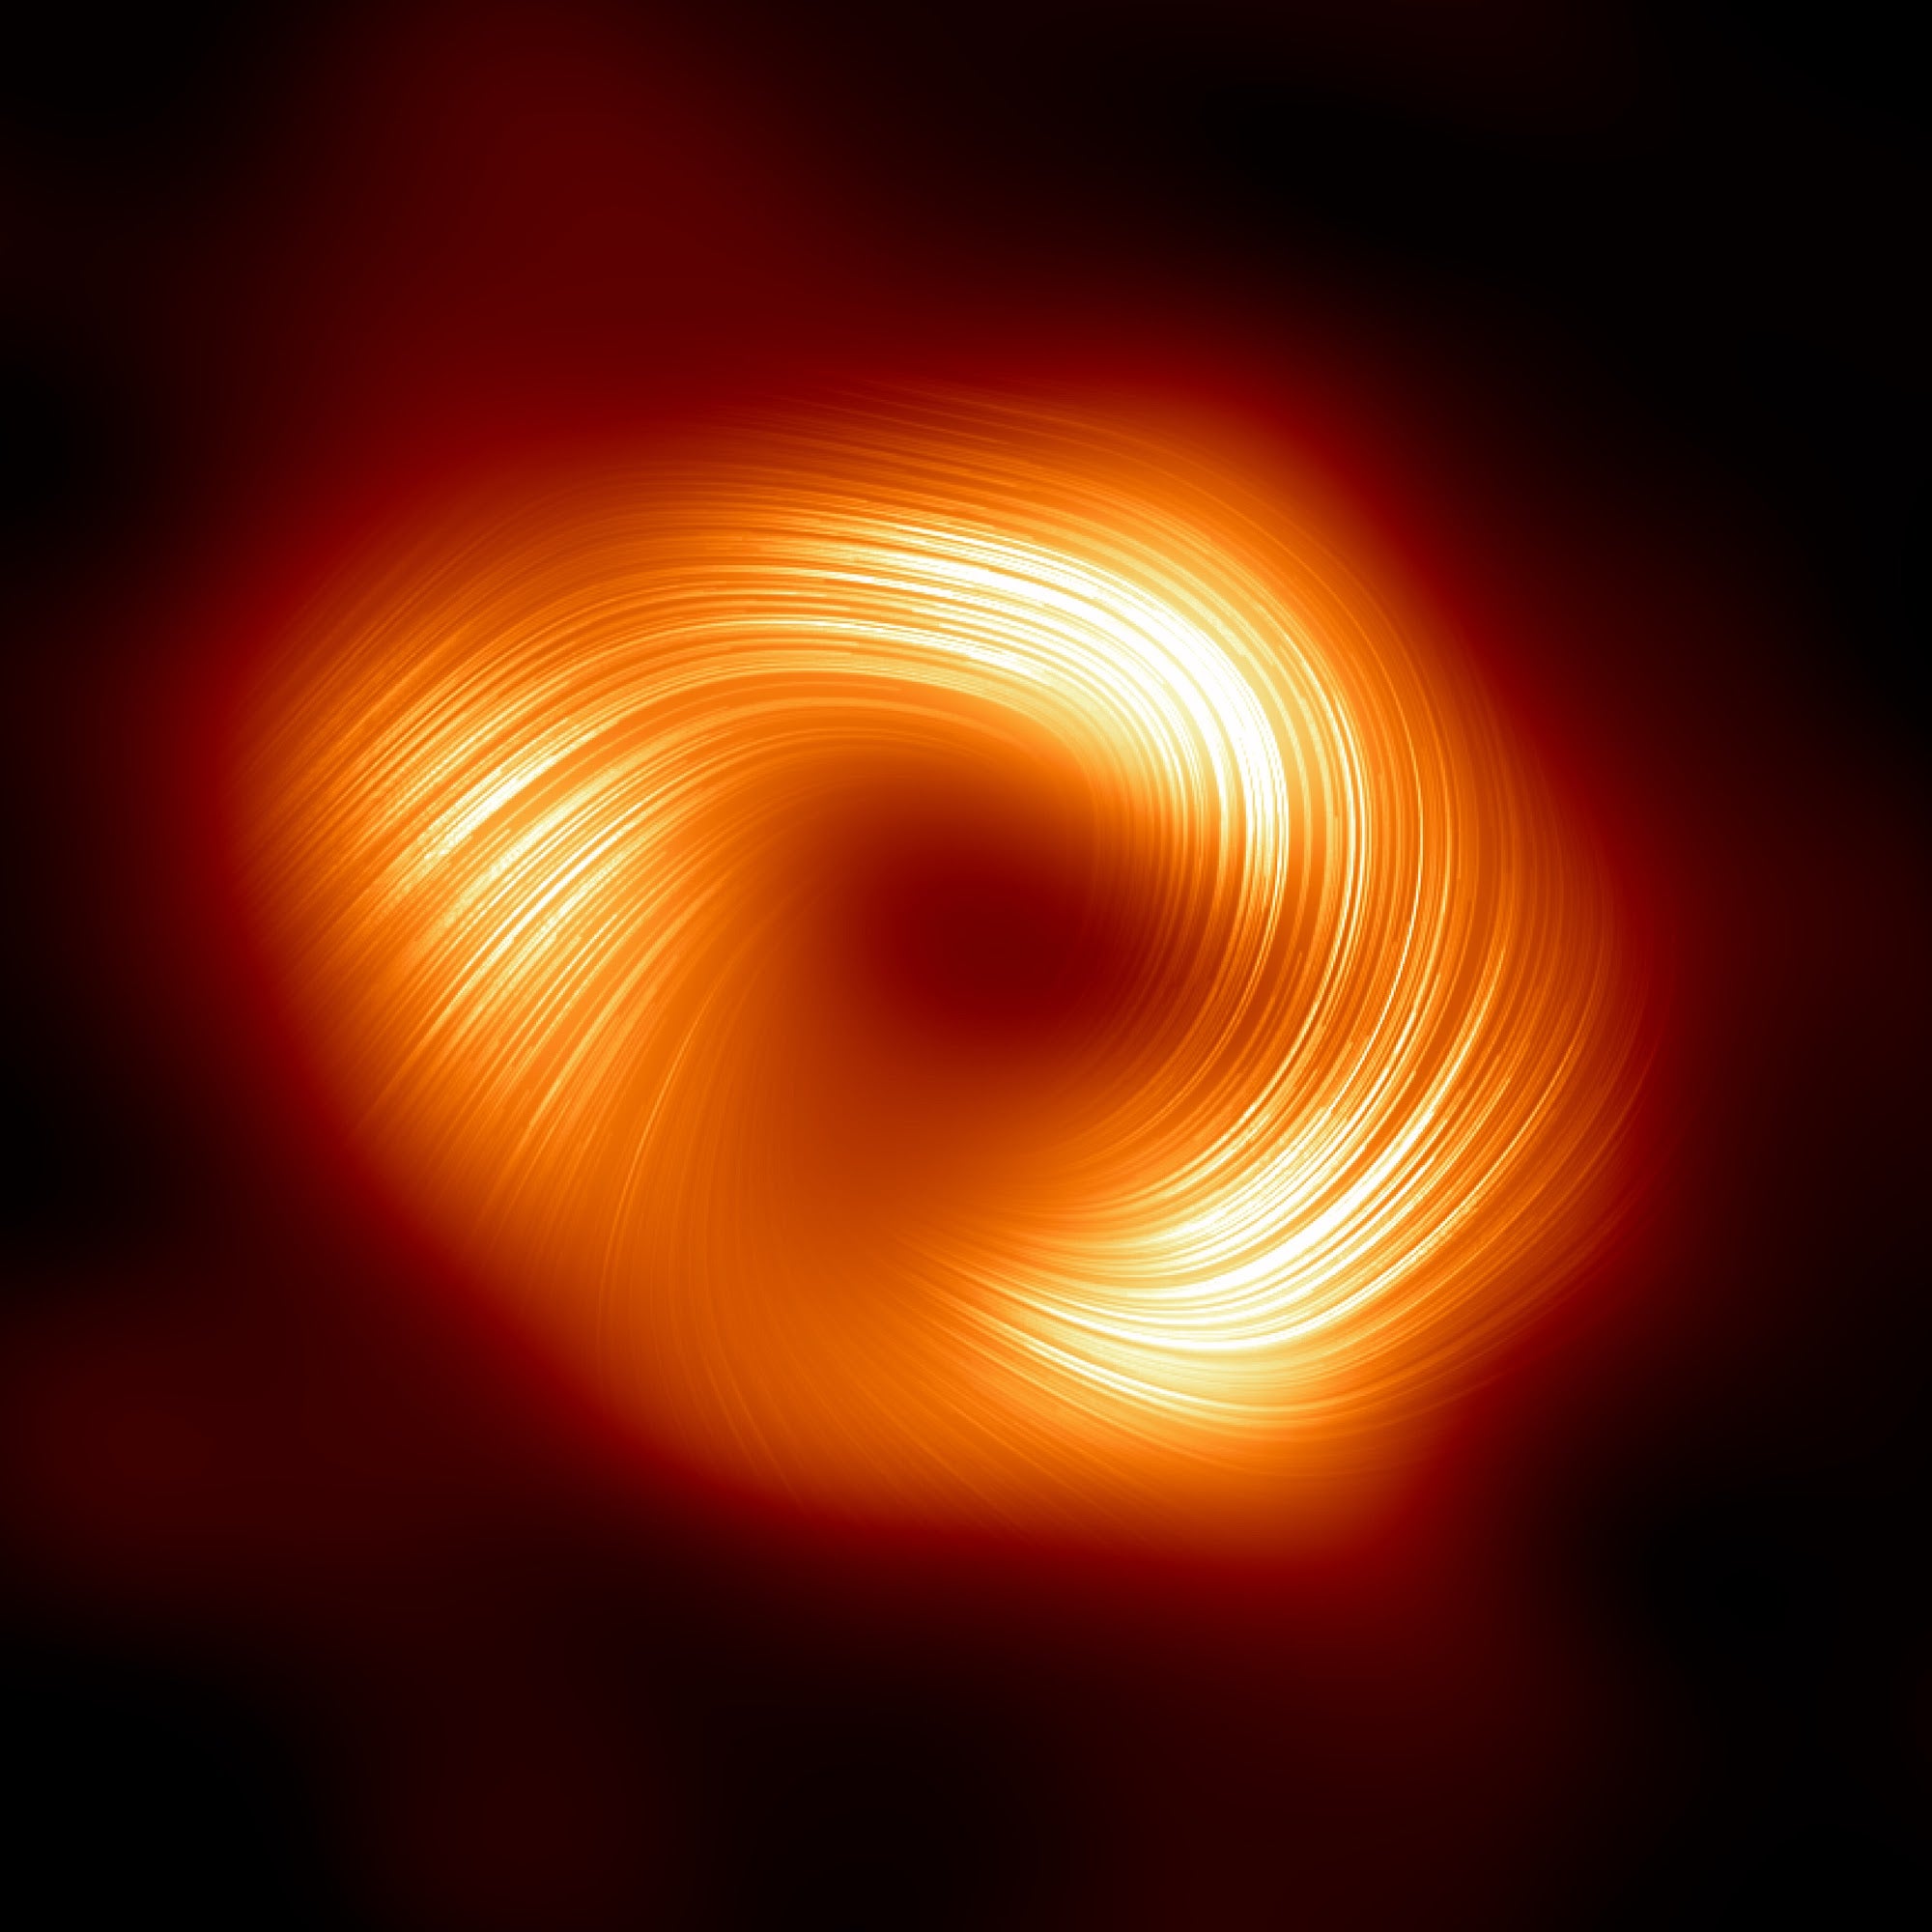 The black hole is said to resemble the Eye of Sauron from the film adaption of JRR Tolkien’s Lord of the Rings